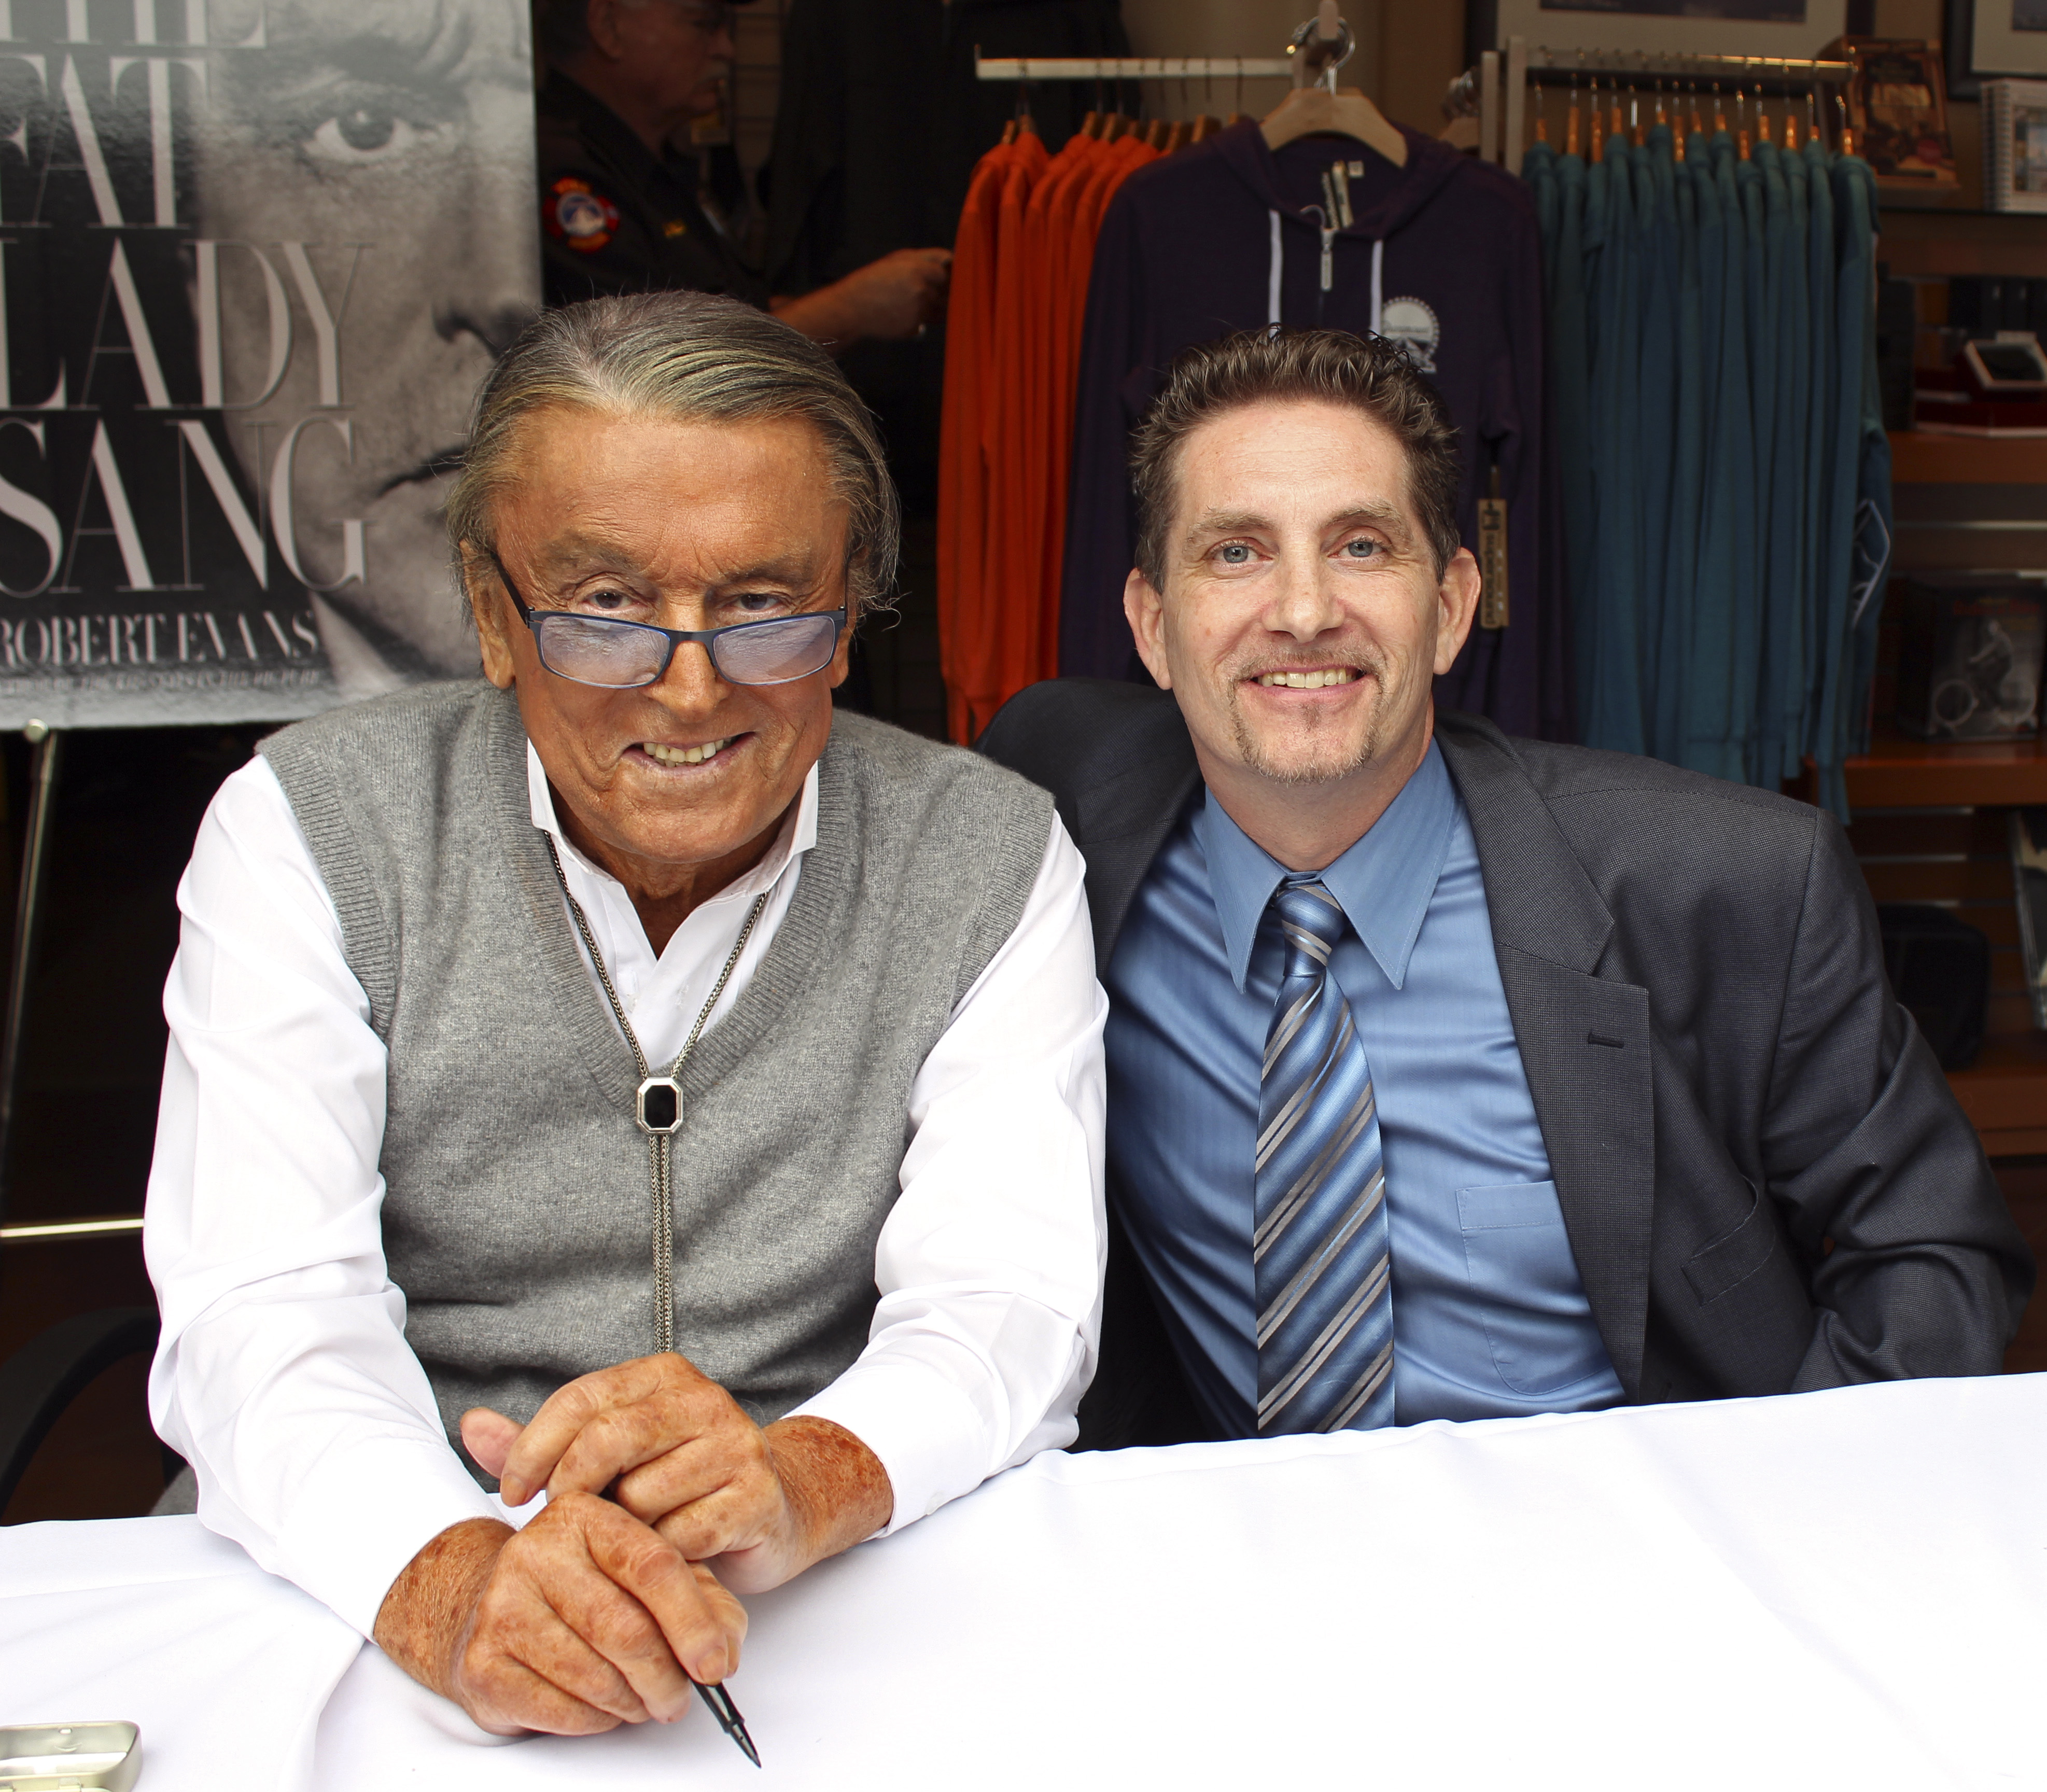 Robert Evans, former Head of Production at Paramount Pictures and producer of such films as Chinatown,Marathon Man and the Godfather with actor Michael Christaldi at Paramount Studios.